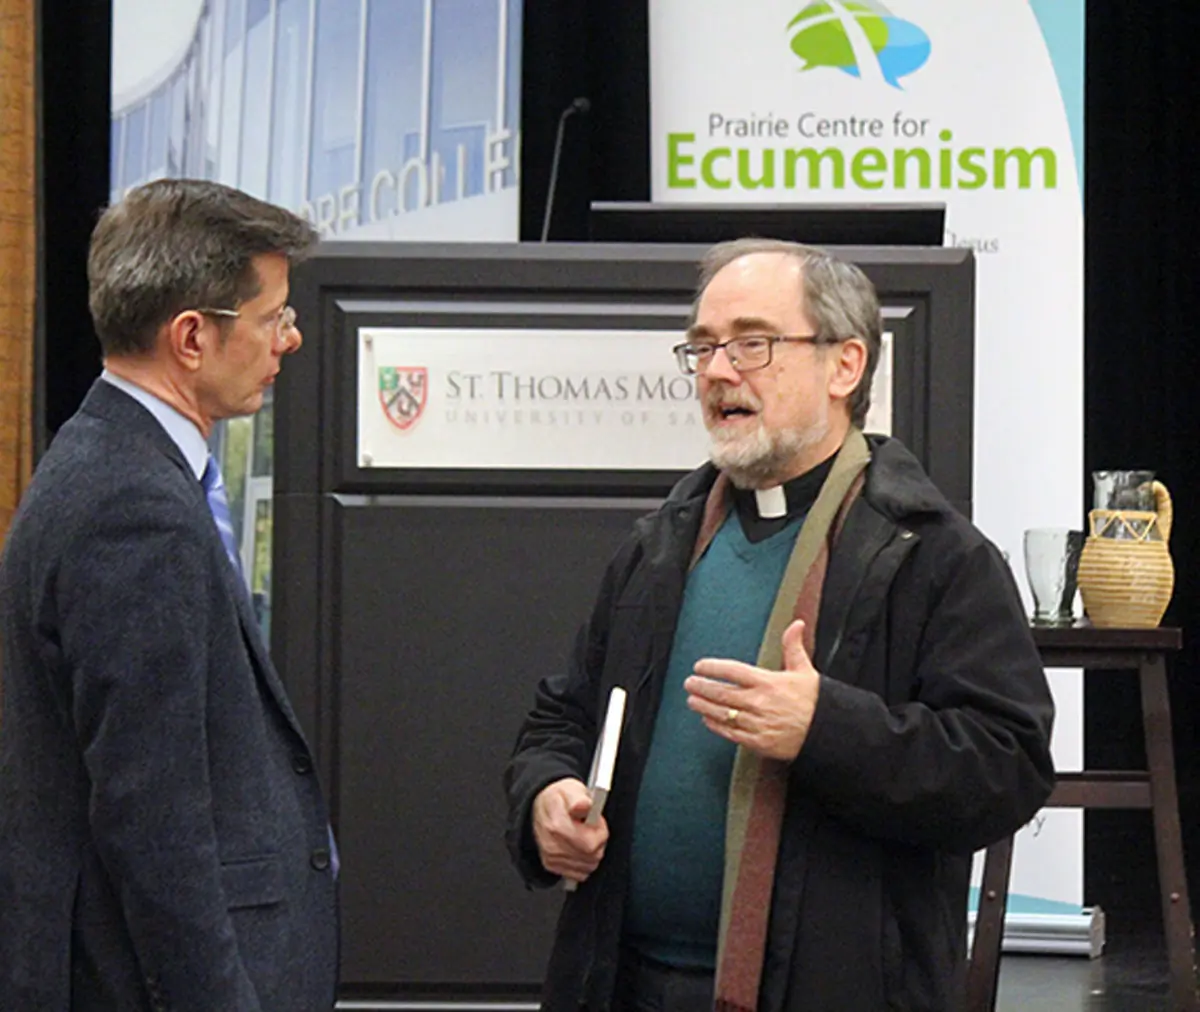 Dr. Carl Still, president of STM College (left), discusses ecumenism with Rev. Dr. Iain Luke, Principal of the College of Emmanuel and St. Chad, part of the Saskatoon Theological Union